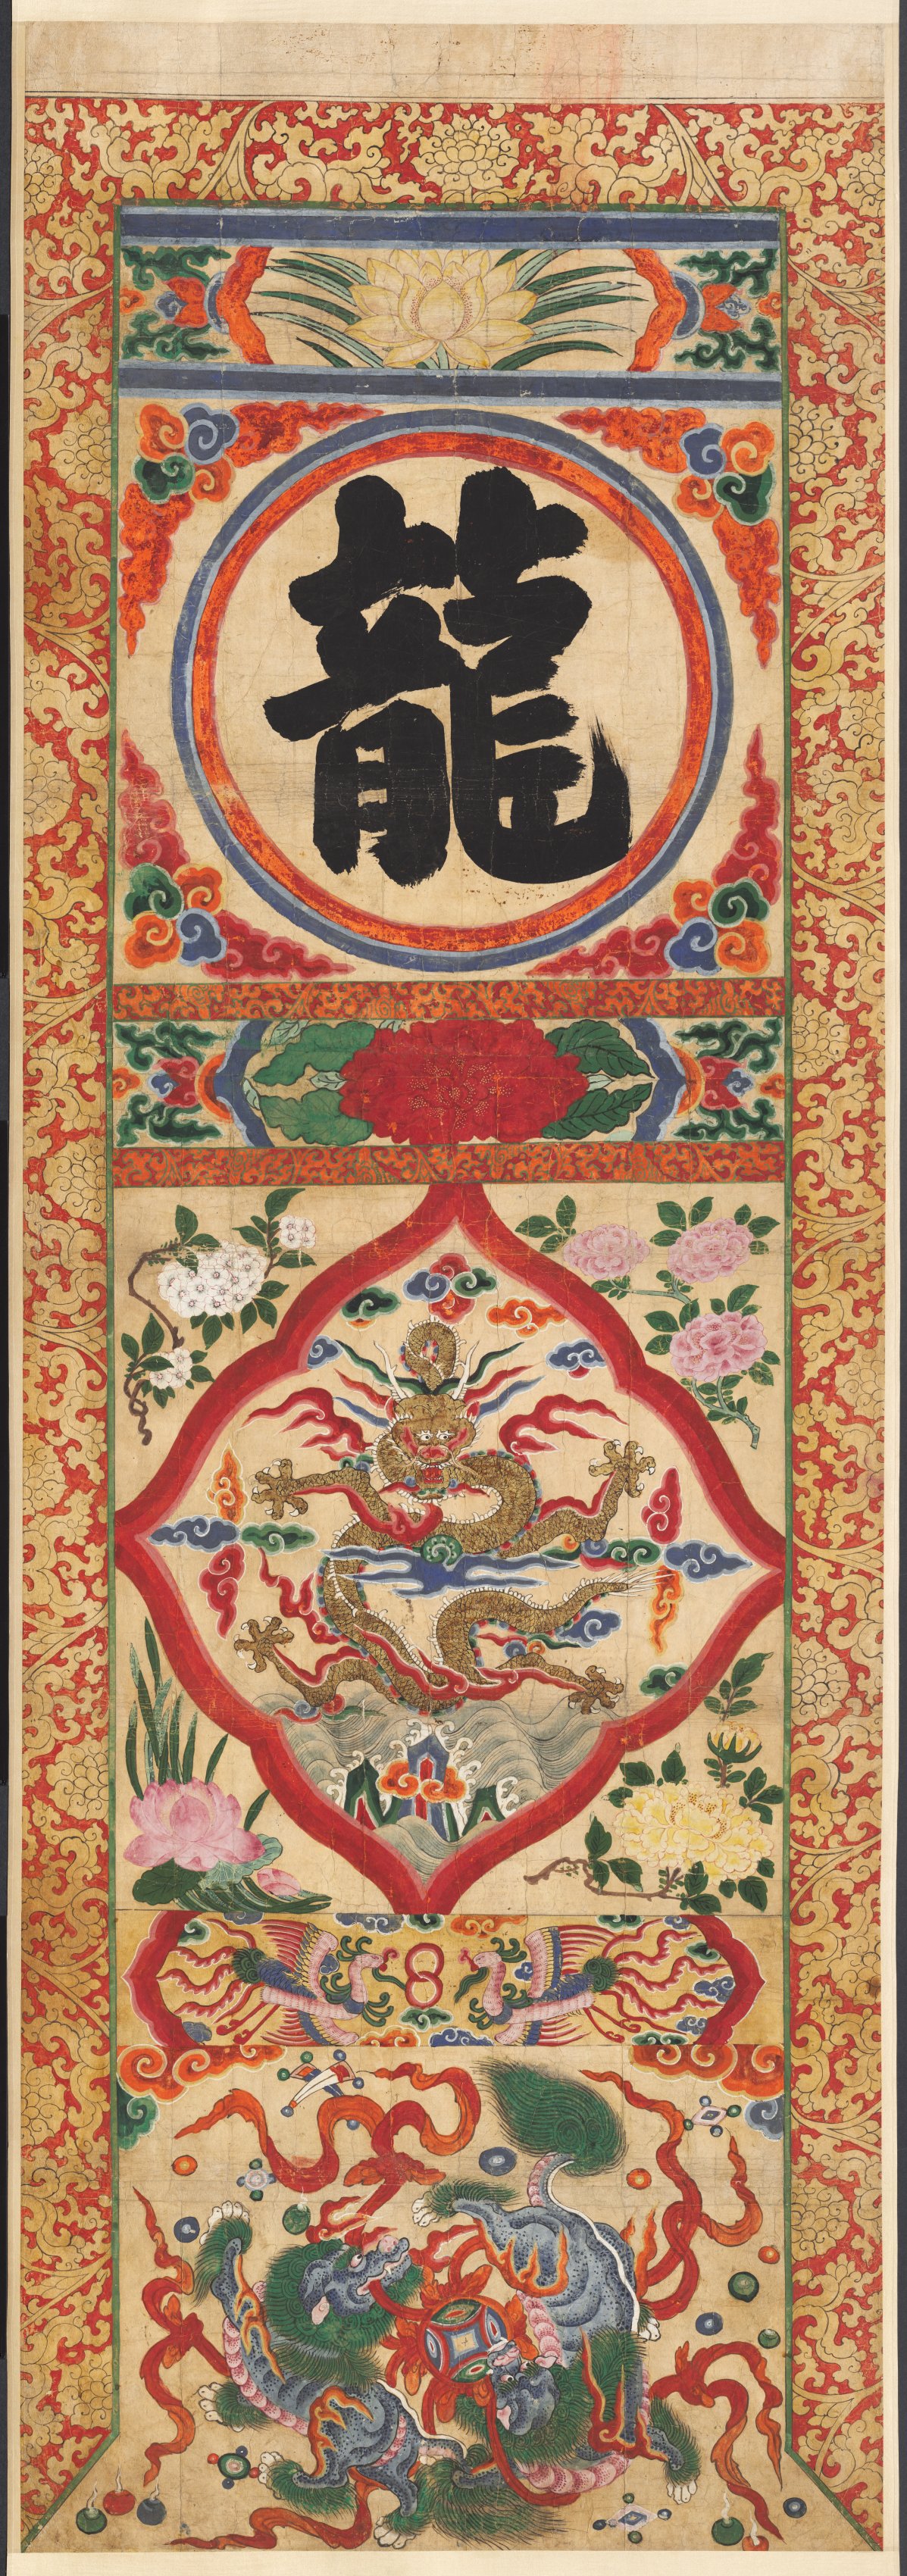 Painted Panel of Character "Dragon"